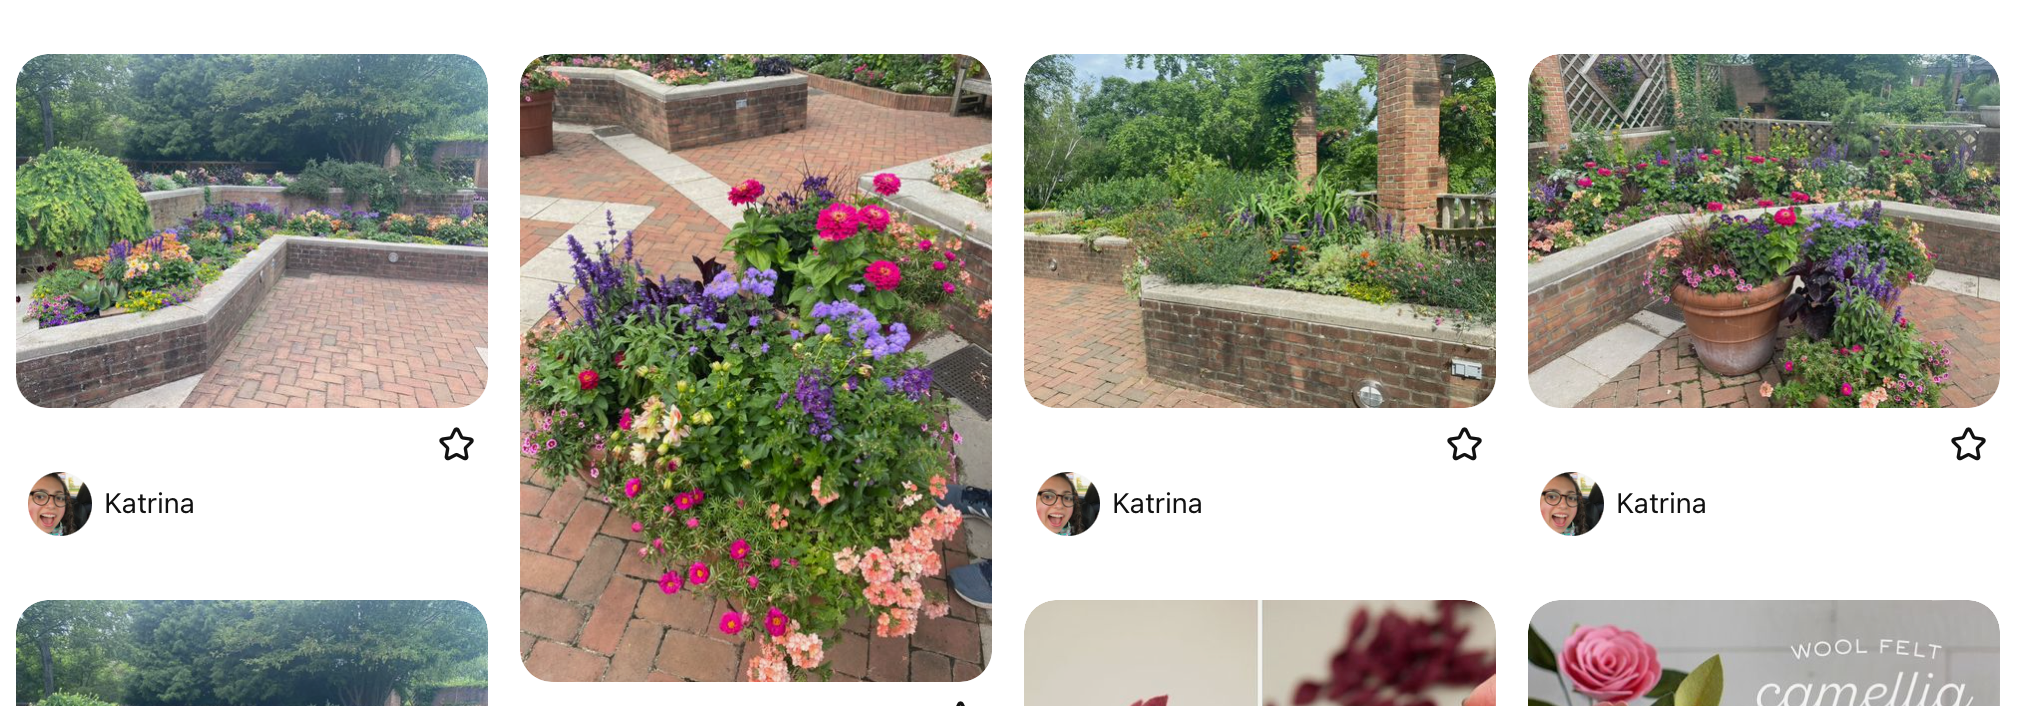 Screen shot of Pinterest board showing pictures from the Chicago Botanic Garden.